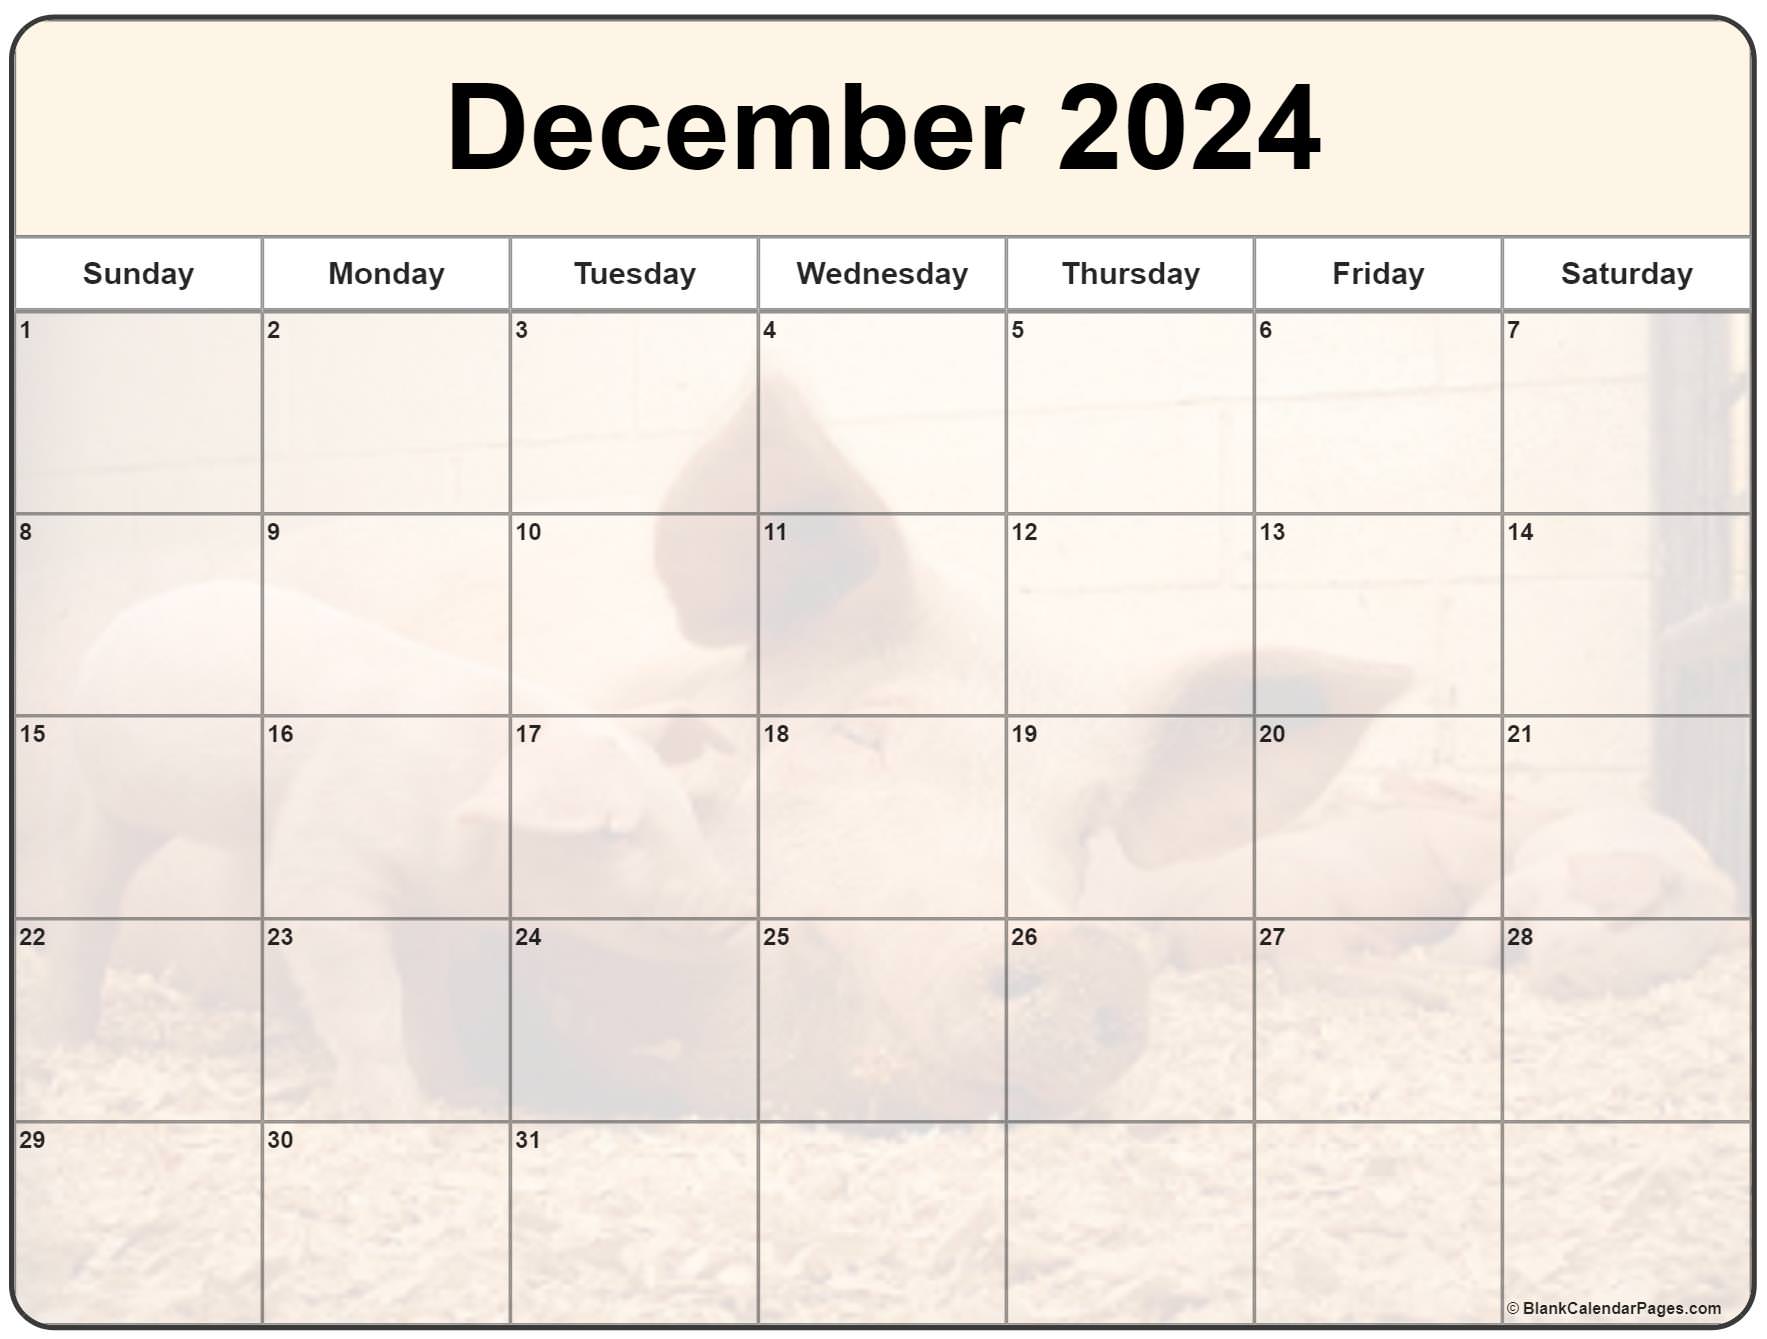 Collection of December 2024 photo calendars with image filters 